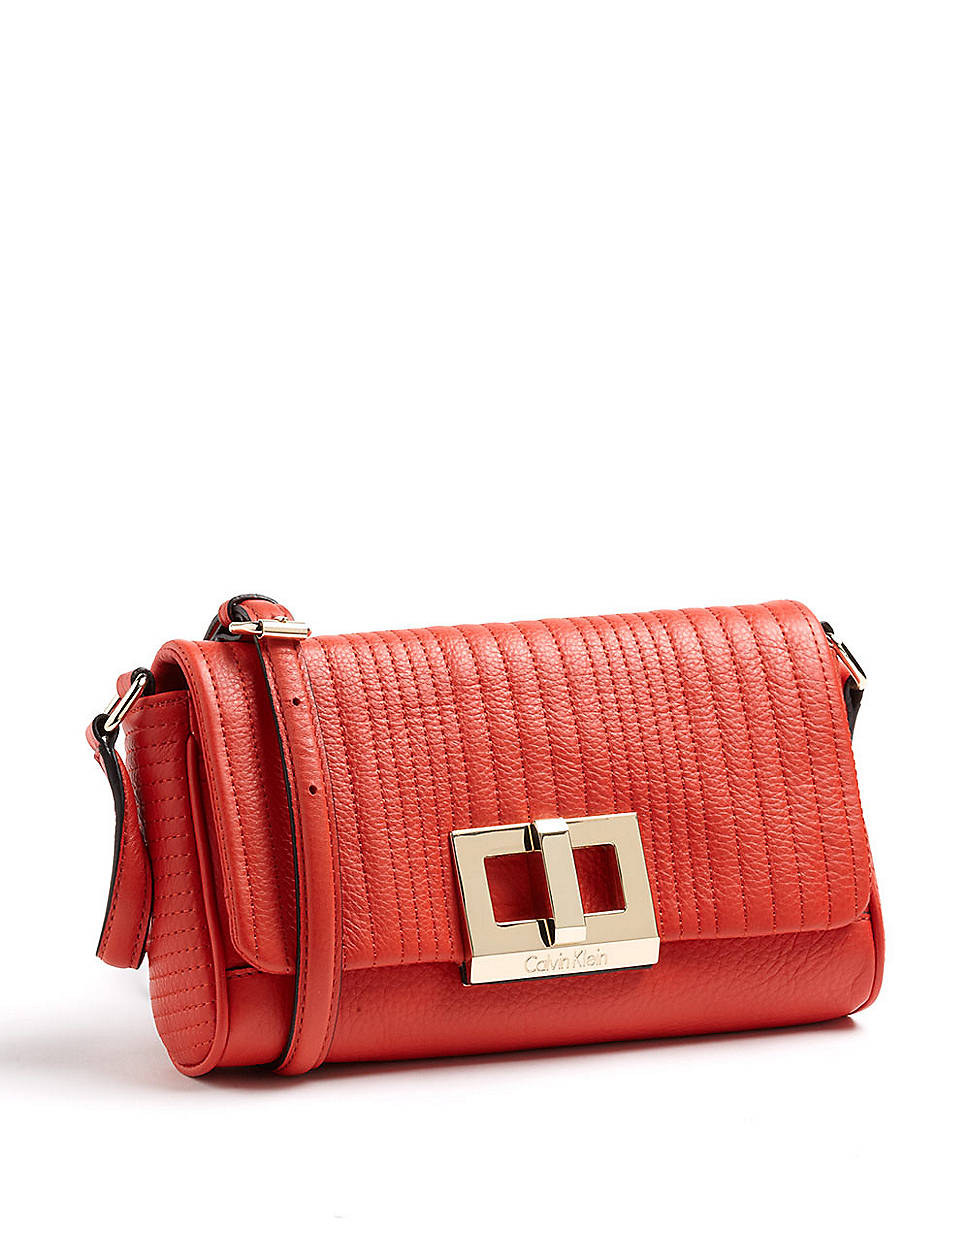 Calvin klein Leather Crossbody Bag in Red | Lyst